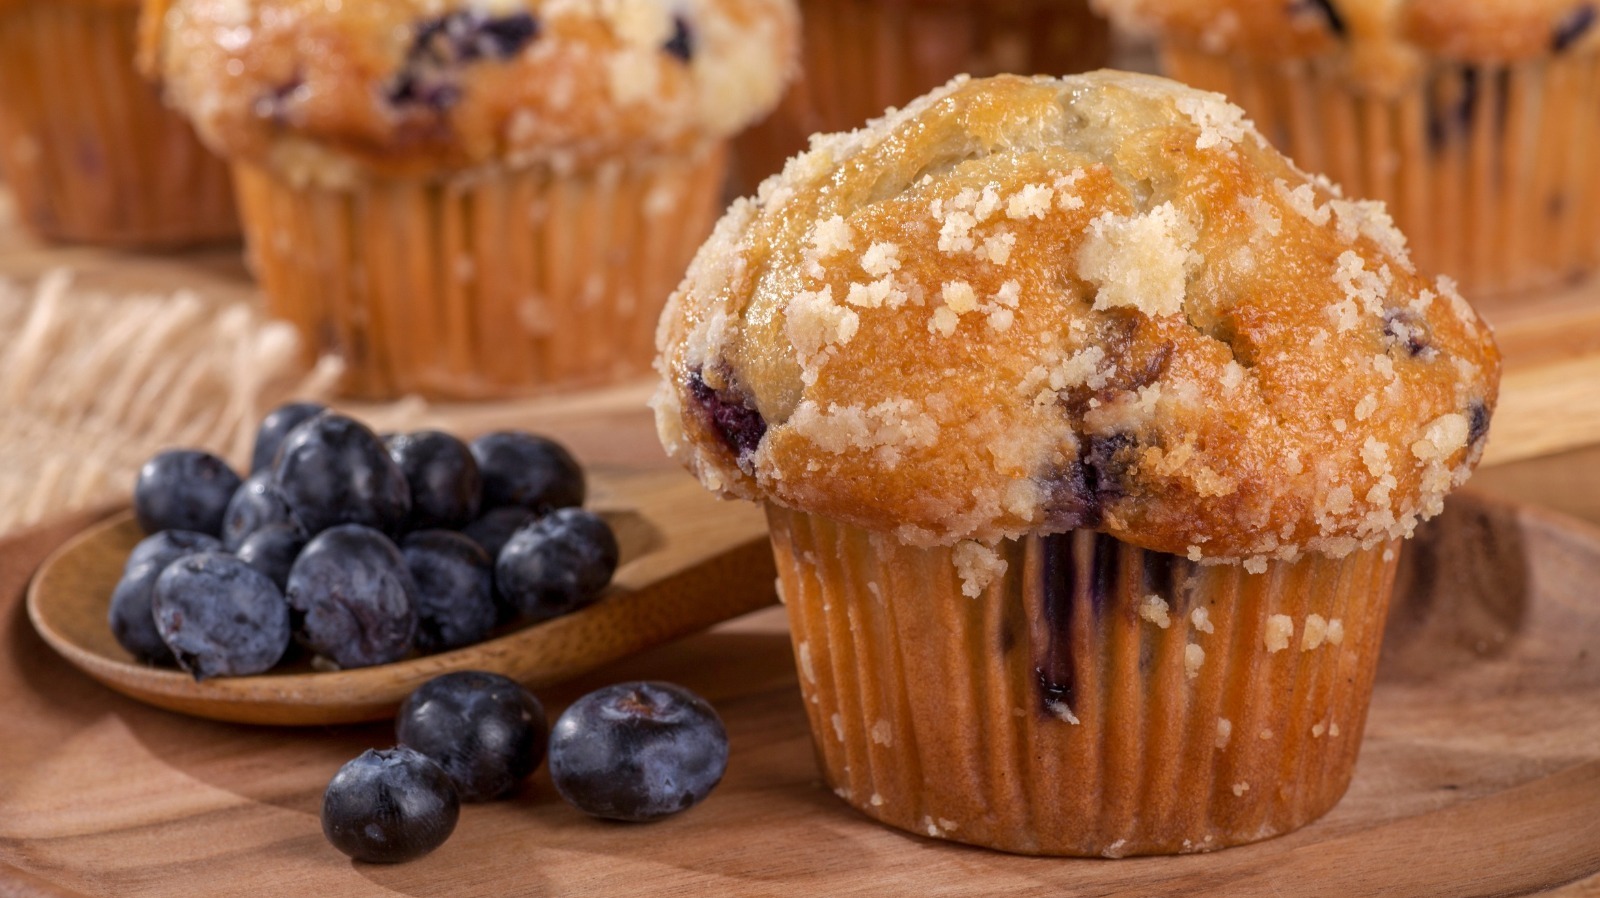 Why You Should Use An Ice Cream Scoop When Making Muffins